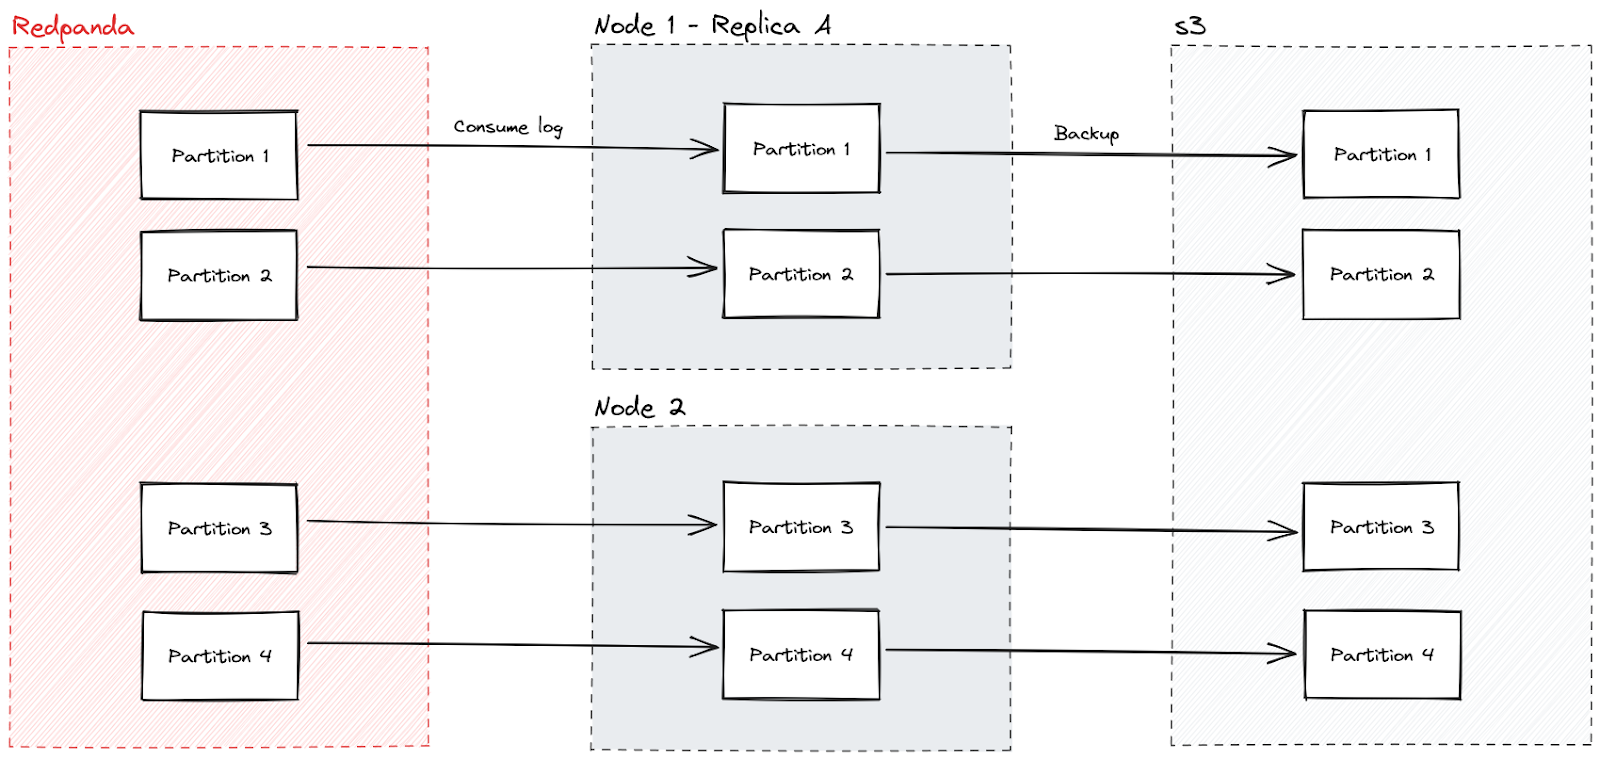 Redpanda to DB partition mapping diagram